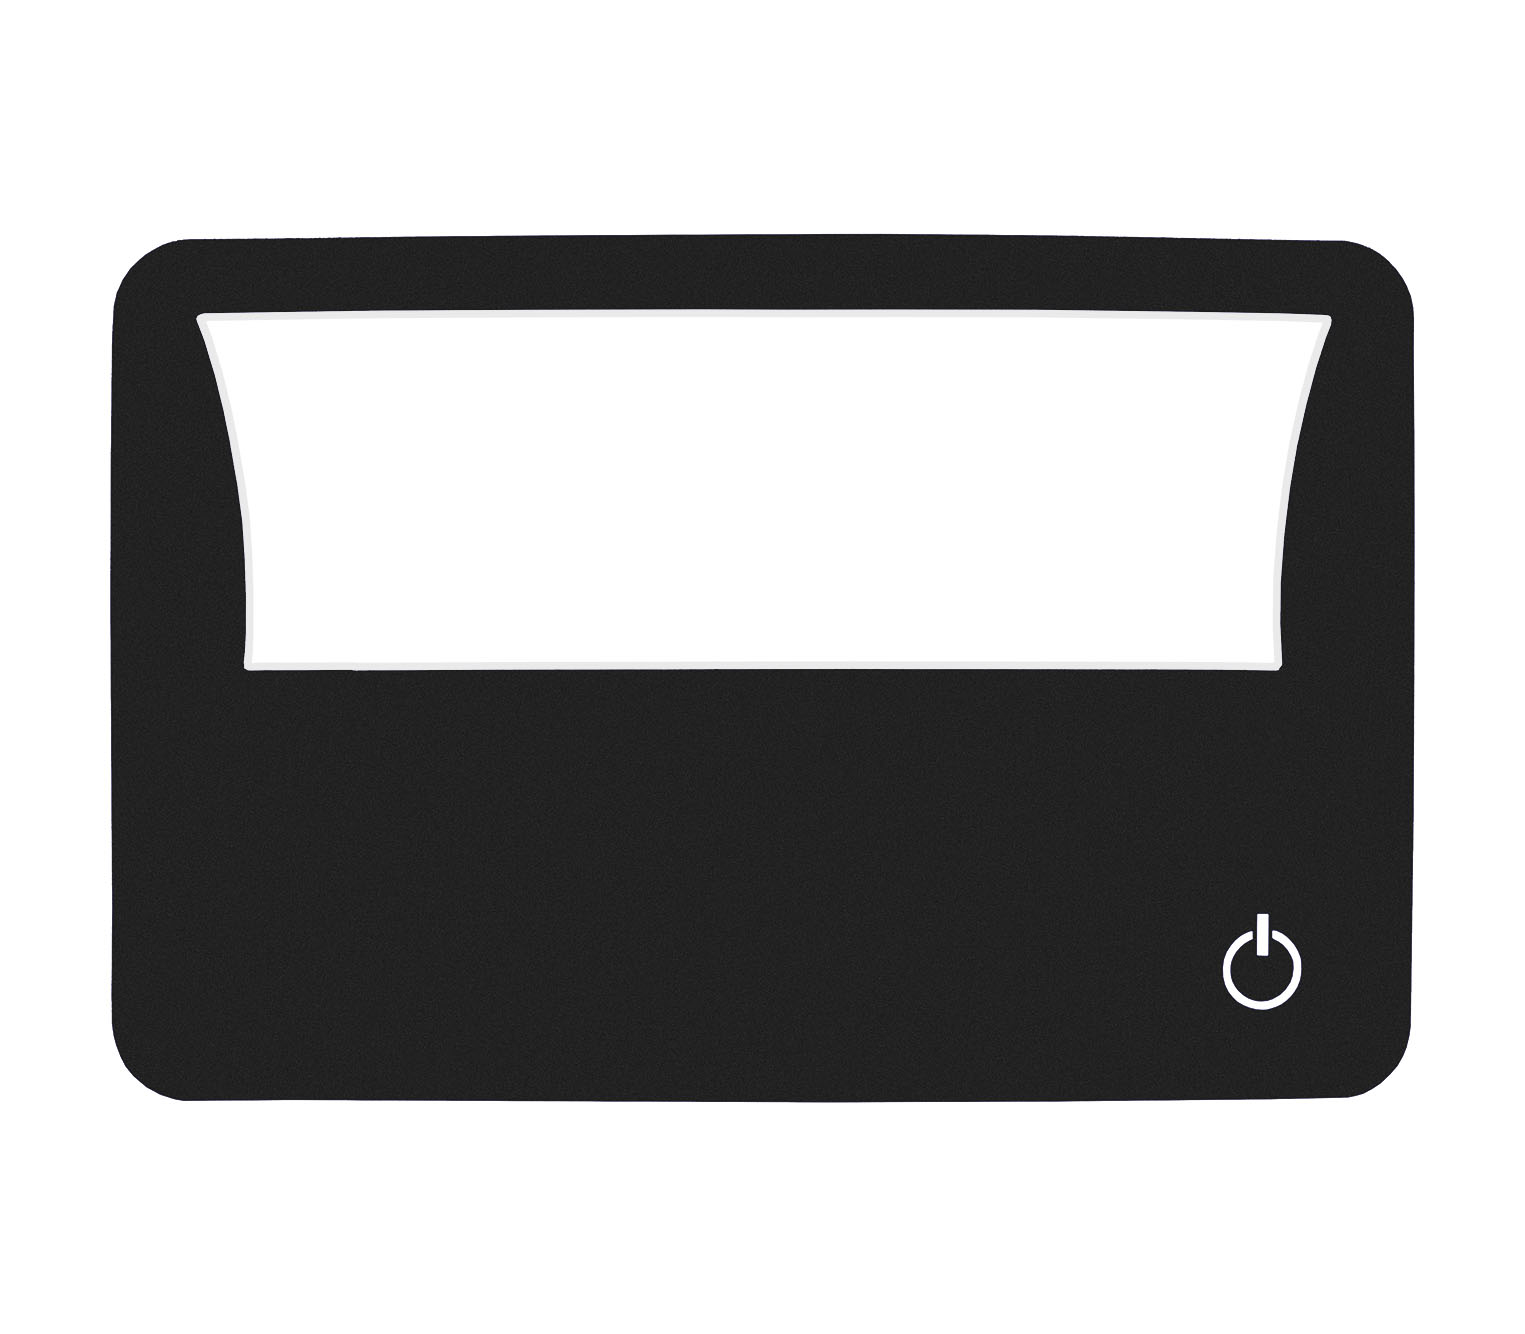 Main Image (Angle) - Wallet Magnifier (LED-Black) Wallet Magnifiers Accessories